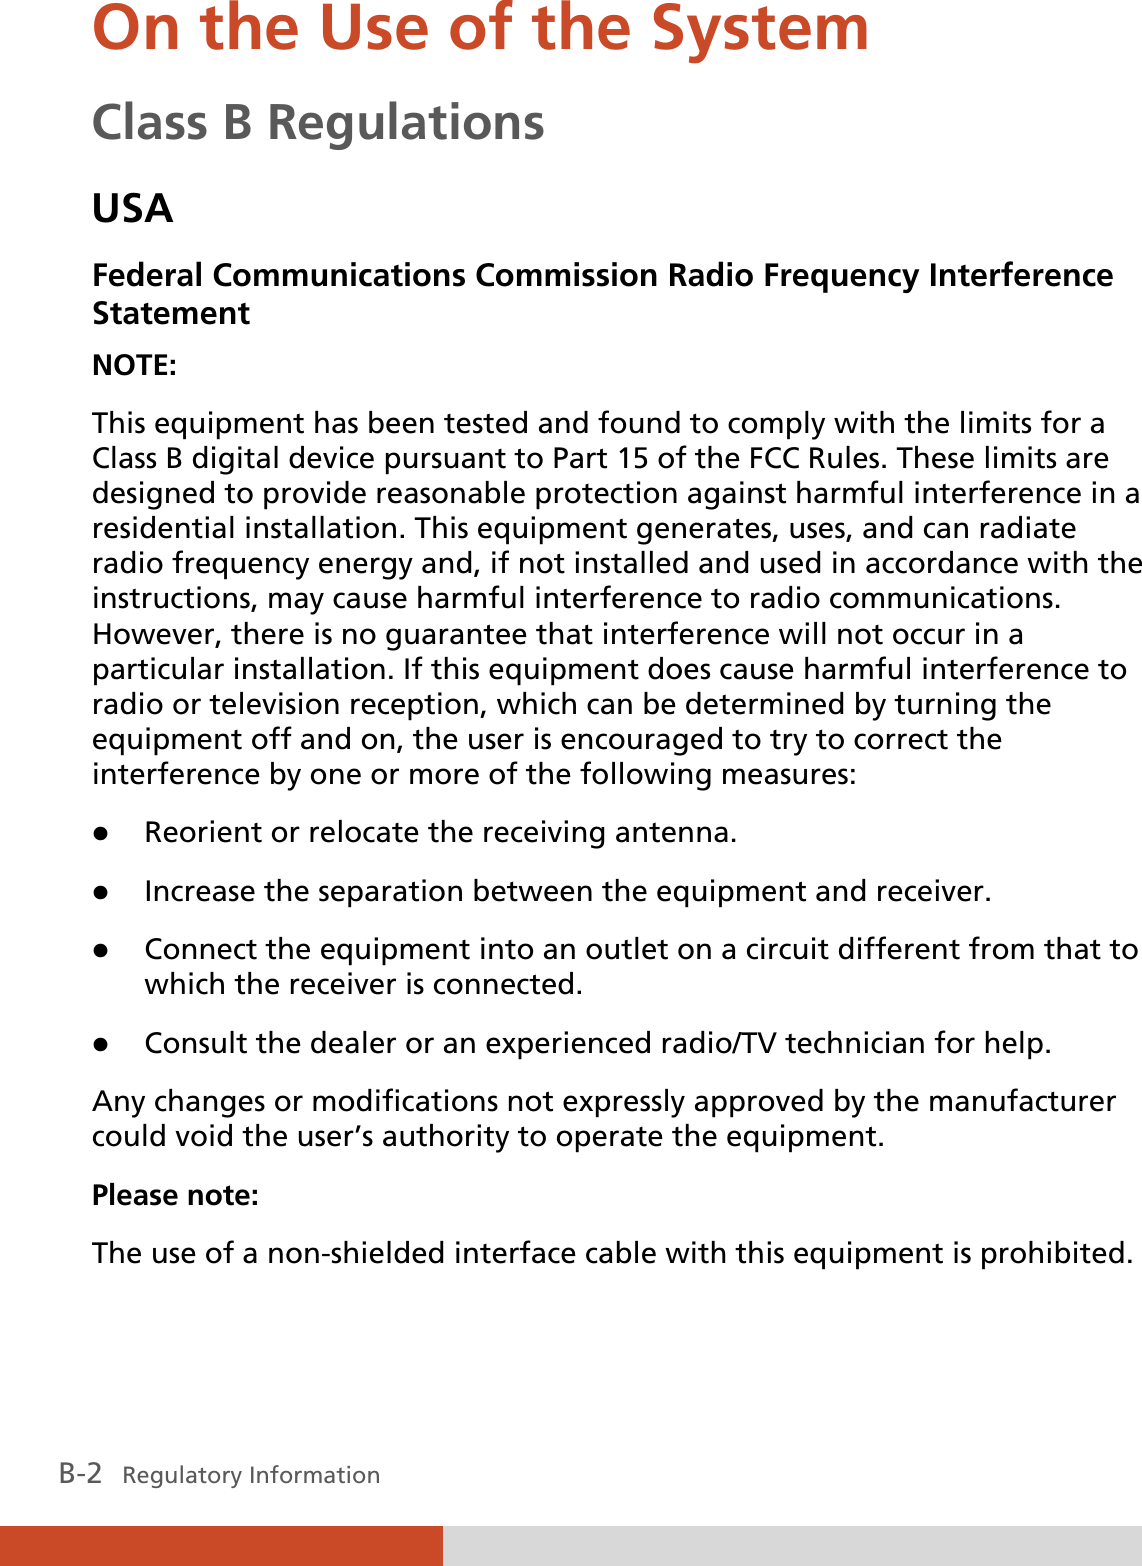  B-2   Regulatory Information On the Use of the System Class B Regulations USA Federal Communications Commission Radio Frequency Interference Statement NOTE: This equipment has been tested and found to comply with the limits for a Class B digital device pursuant to Part 15 of the FCC Rules. These limits are designed to provide reasonable protection against harmful interference in a residential installation. This equipment generates, uses, and can radiate radio frequency energy and, if not installed and used in accordance with the instructions, may cause harmful interference to radio communications. However, there is no guarantee that interference will not occur in a particular installation. If this equipment does cause harmful interference to radio or television reception, which can be determined by turning the equipment off and on, the user is encouraged to try to correct the interference by one or more of the following measures: z Reorient or relocate the receiving antenna. z Increase the separation between the equipment and receiver. z Connect the equipment into an outlet on a circuit different from that to which the receiver is connected. z Consult the dealer or an experienced radio/TV technician for help. Any changes or modifications not expressly approved by the manufacturer could void the user’s authority to operate the equipment. Please note: The use of a non-shielded interface cable with this equipment is prohibited. 